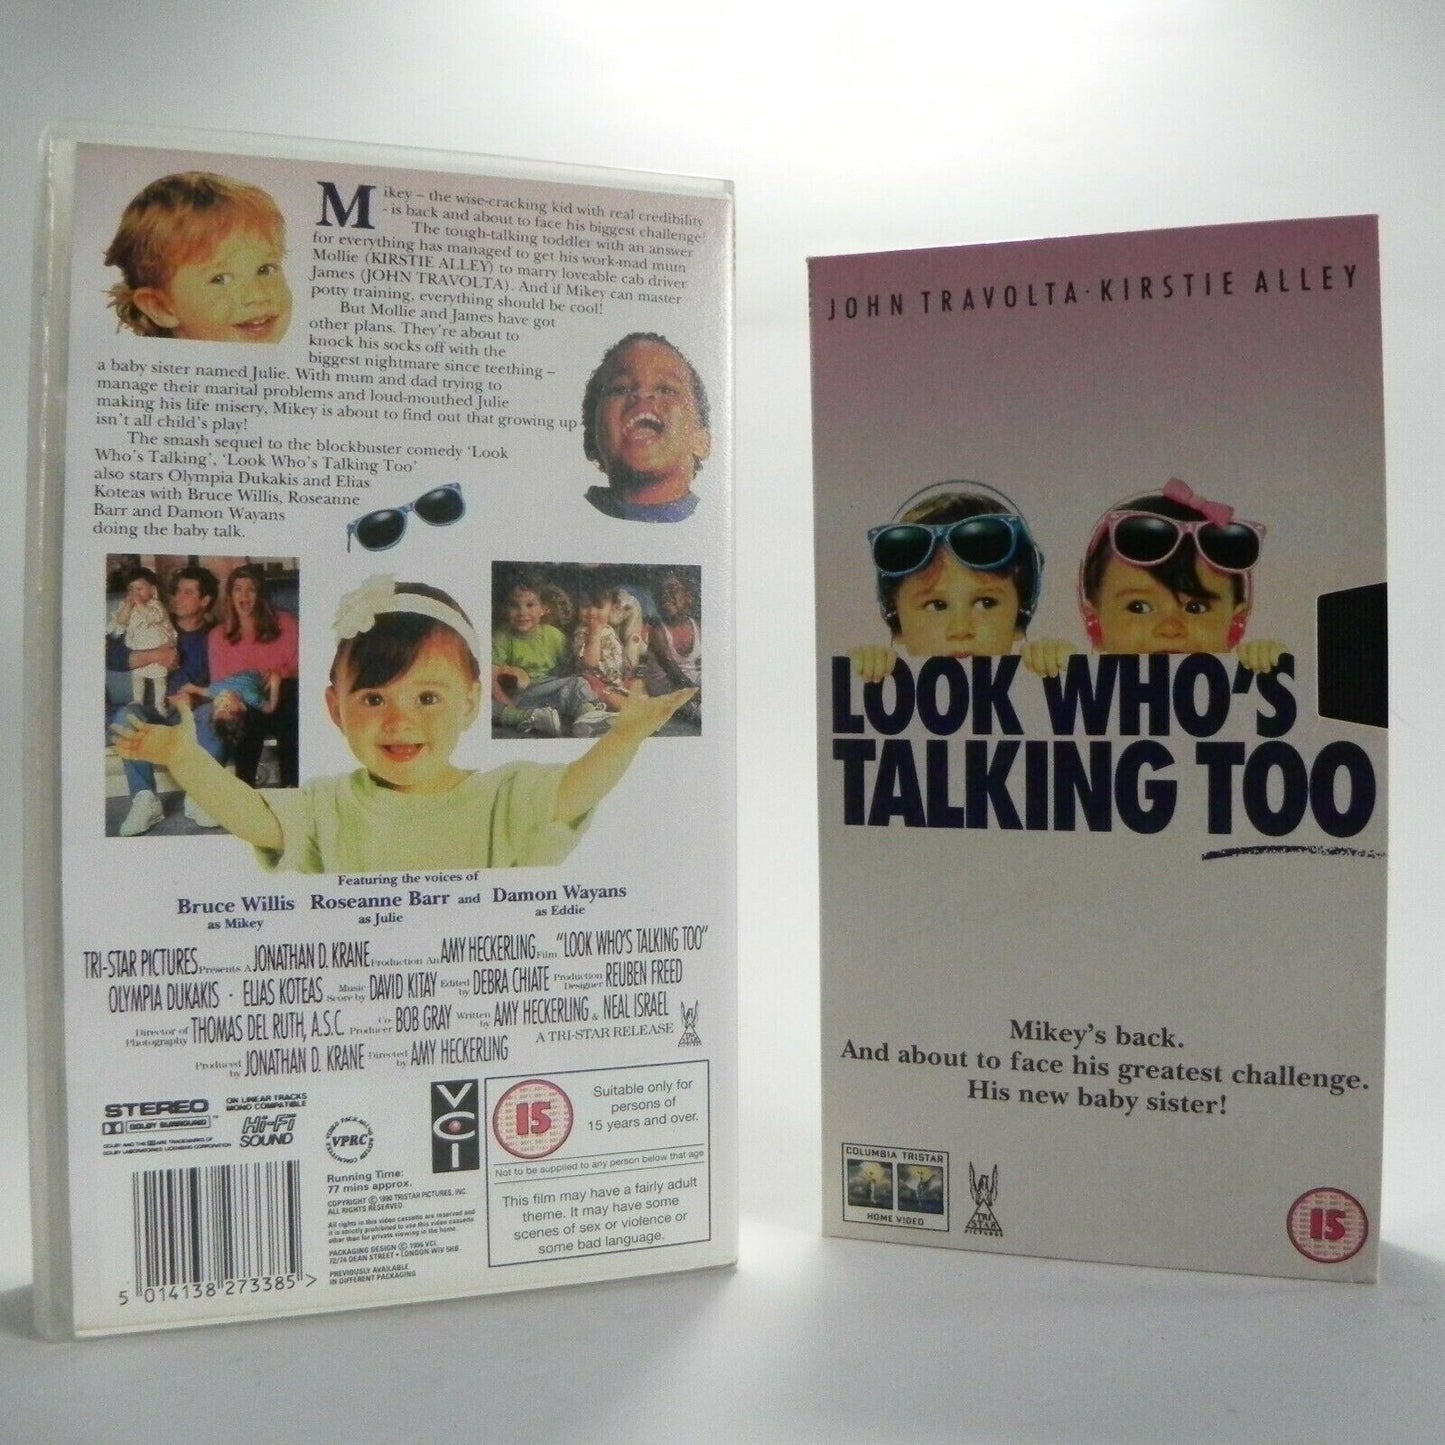 Look Who's Talking Too: Classic Comedy (1990) - J.Travolta/K.Alley - Pal VHS-